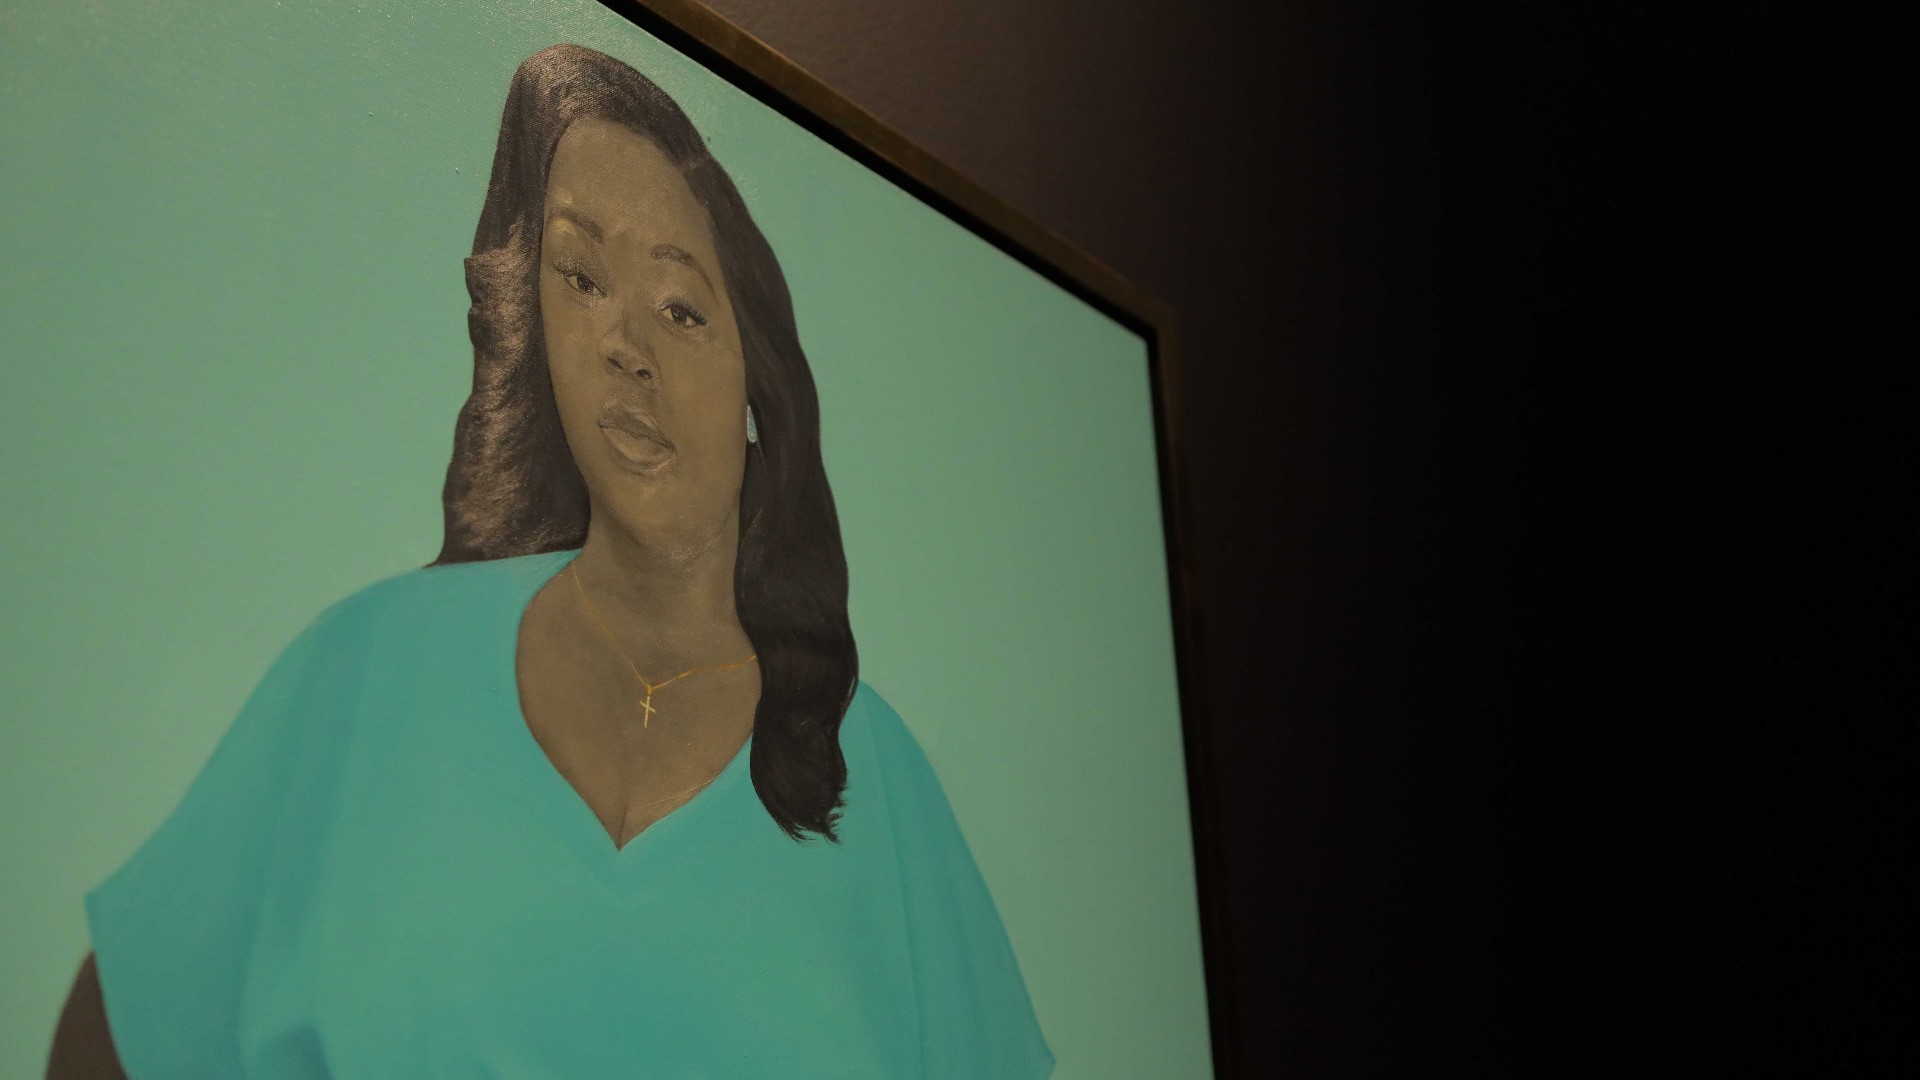 Curated by Allison Glenn reflects on the life of Breonna Taylor, her killing in 2020, and the year of protests that followed, in Louisville and around the world.